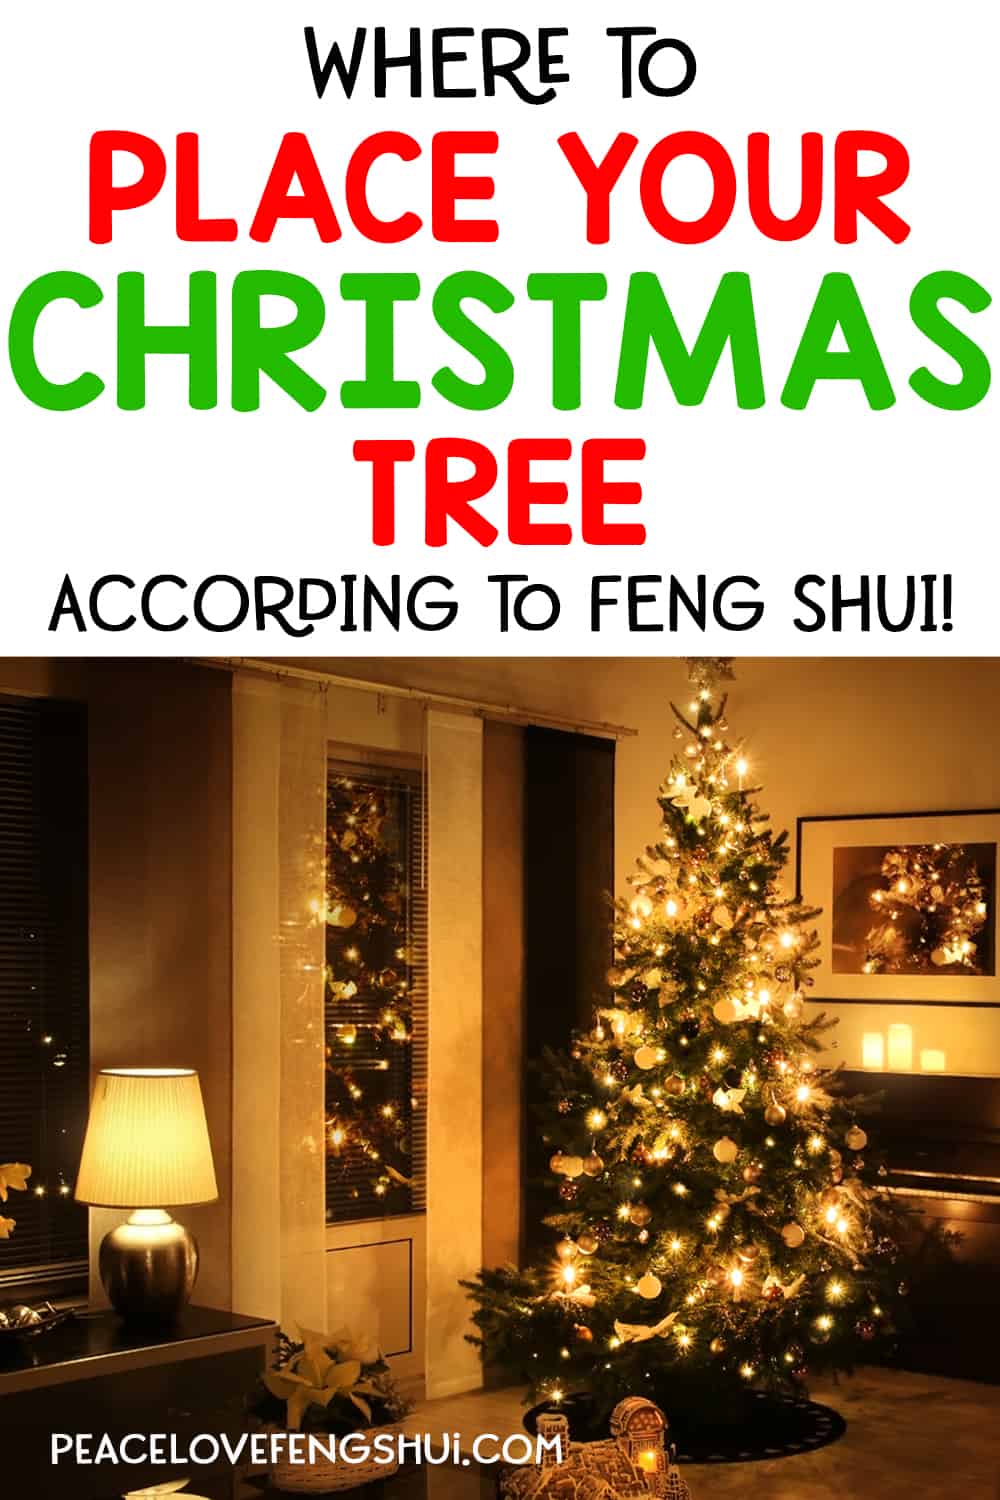 where to place your Christmas tree according to feng shui